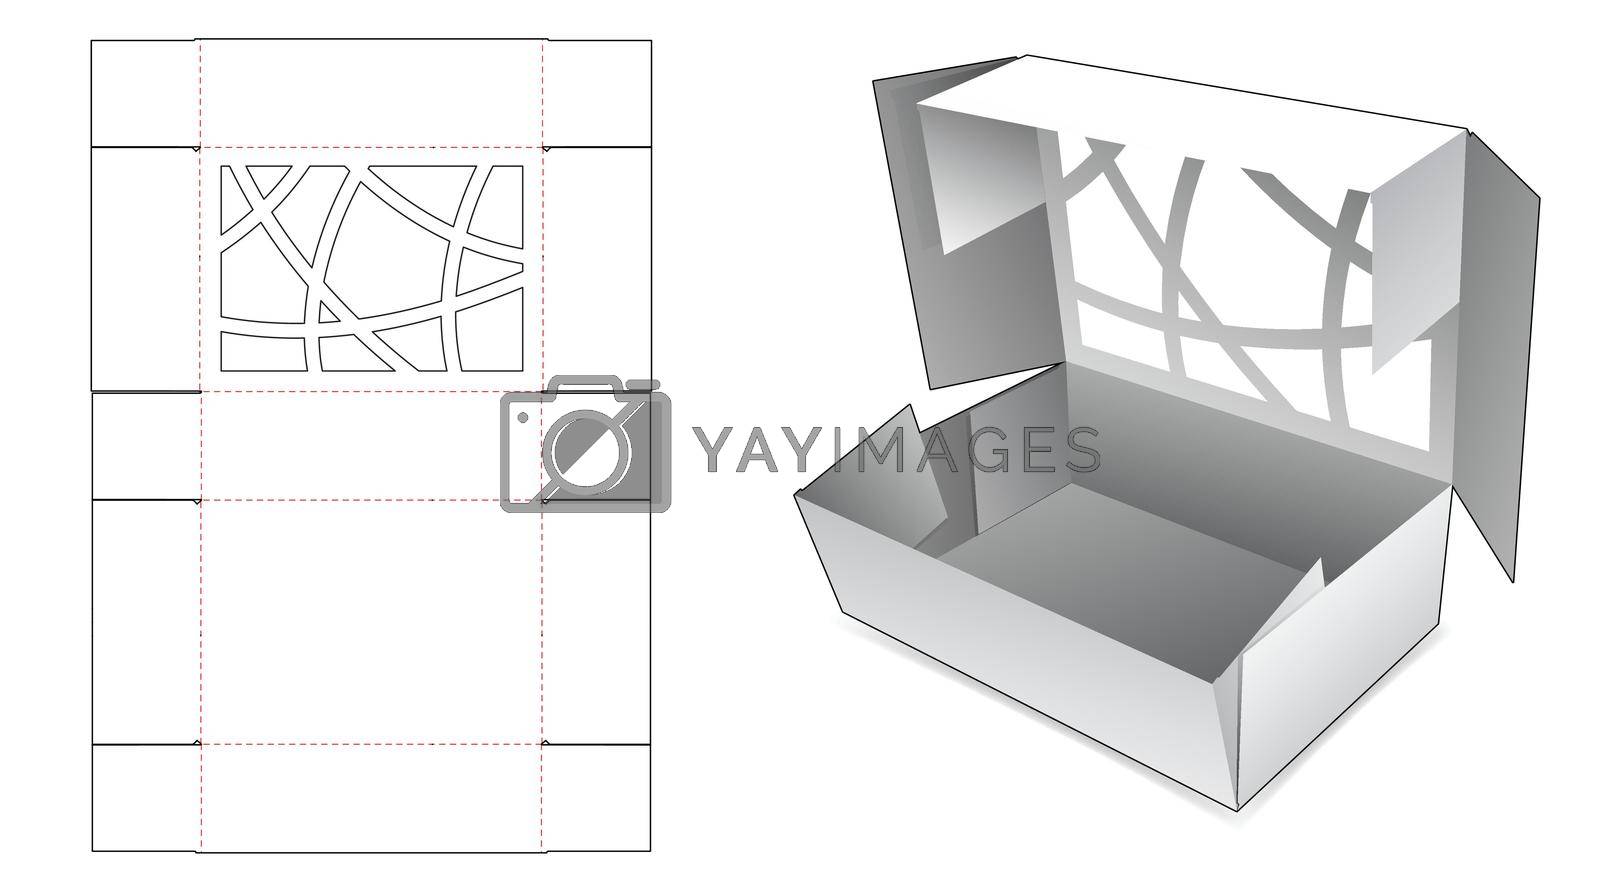 Royalty free image of 1 piece folded box with abstract window die cut template by valueinvestor